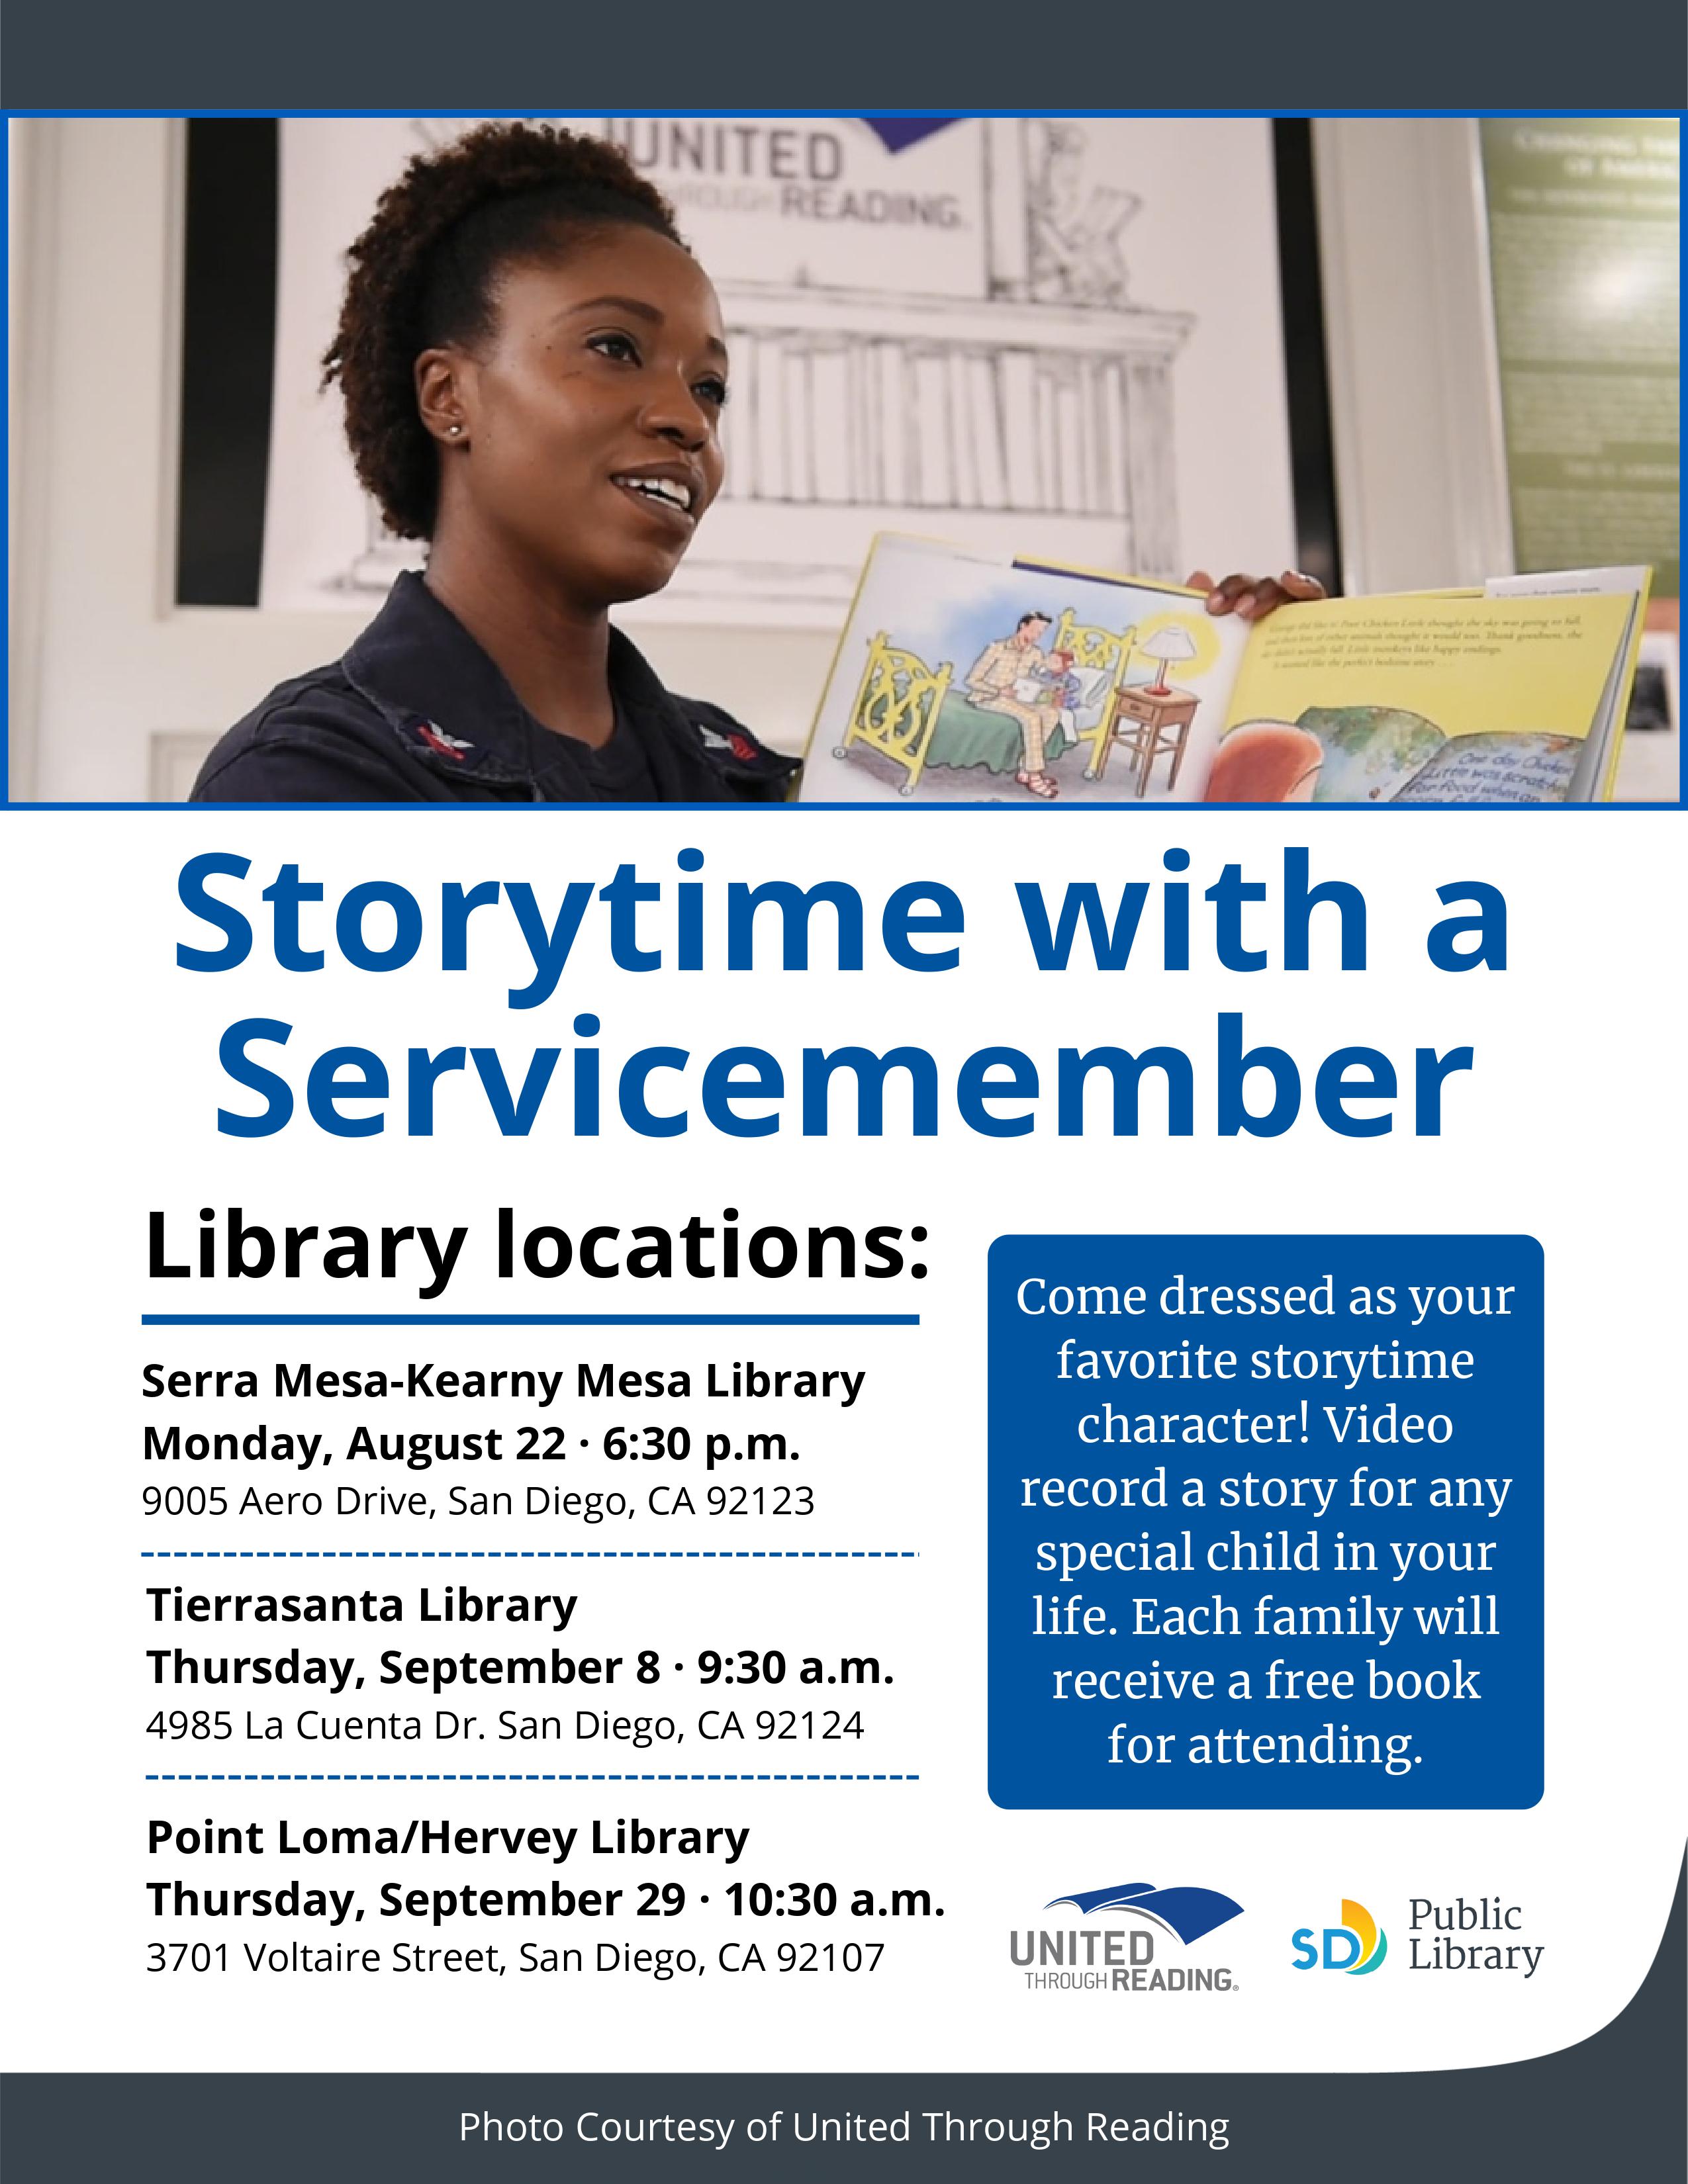 Flyer with a black female service member reading a children's story